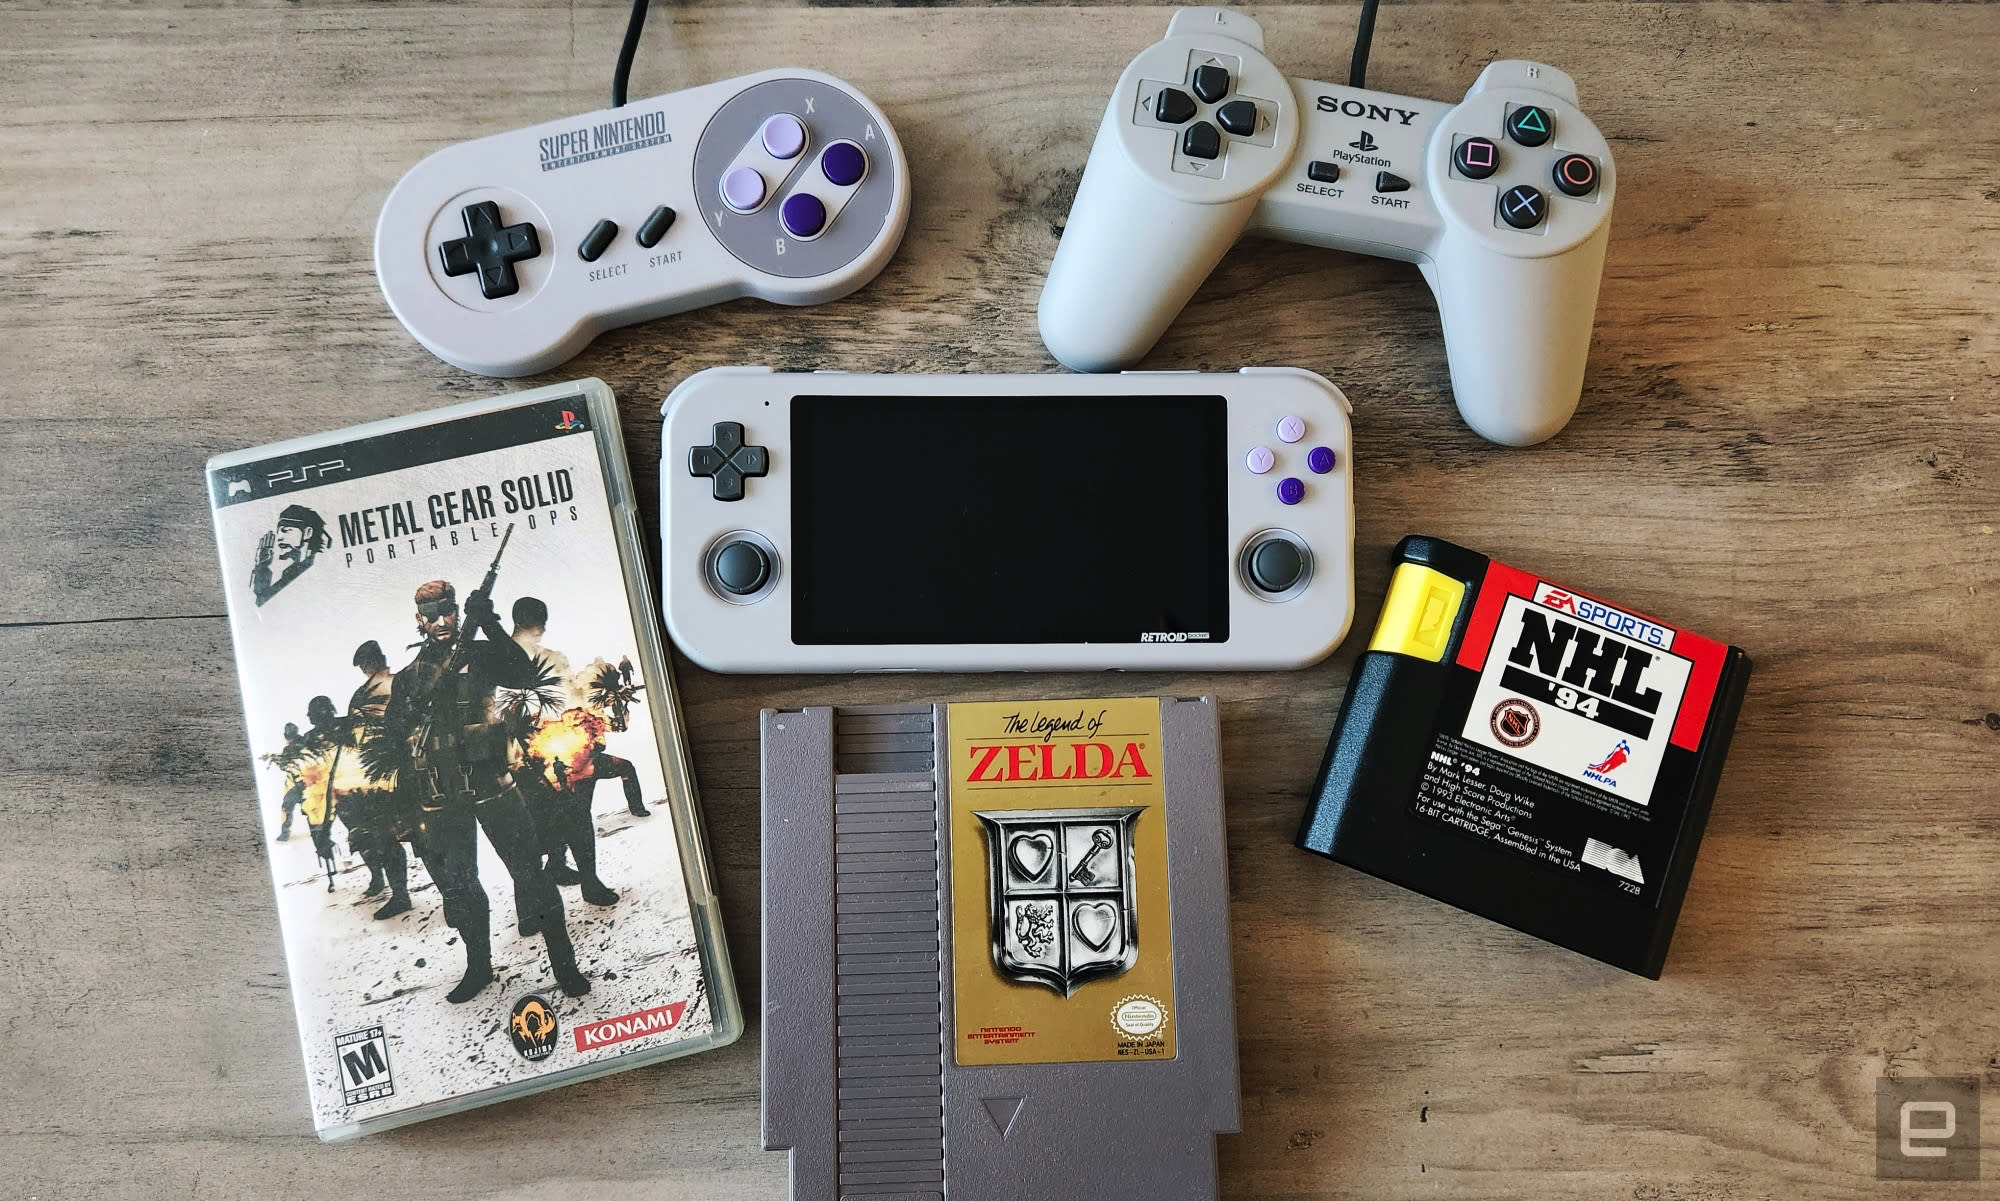 The Retroid Pocket 3 gaming handheld surrounded by old gaming cartridges and wired controllers.